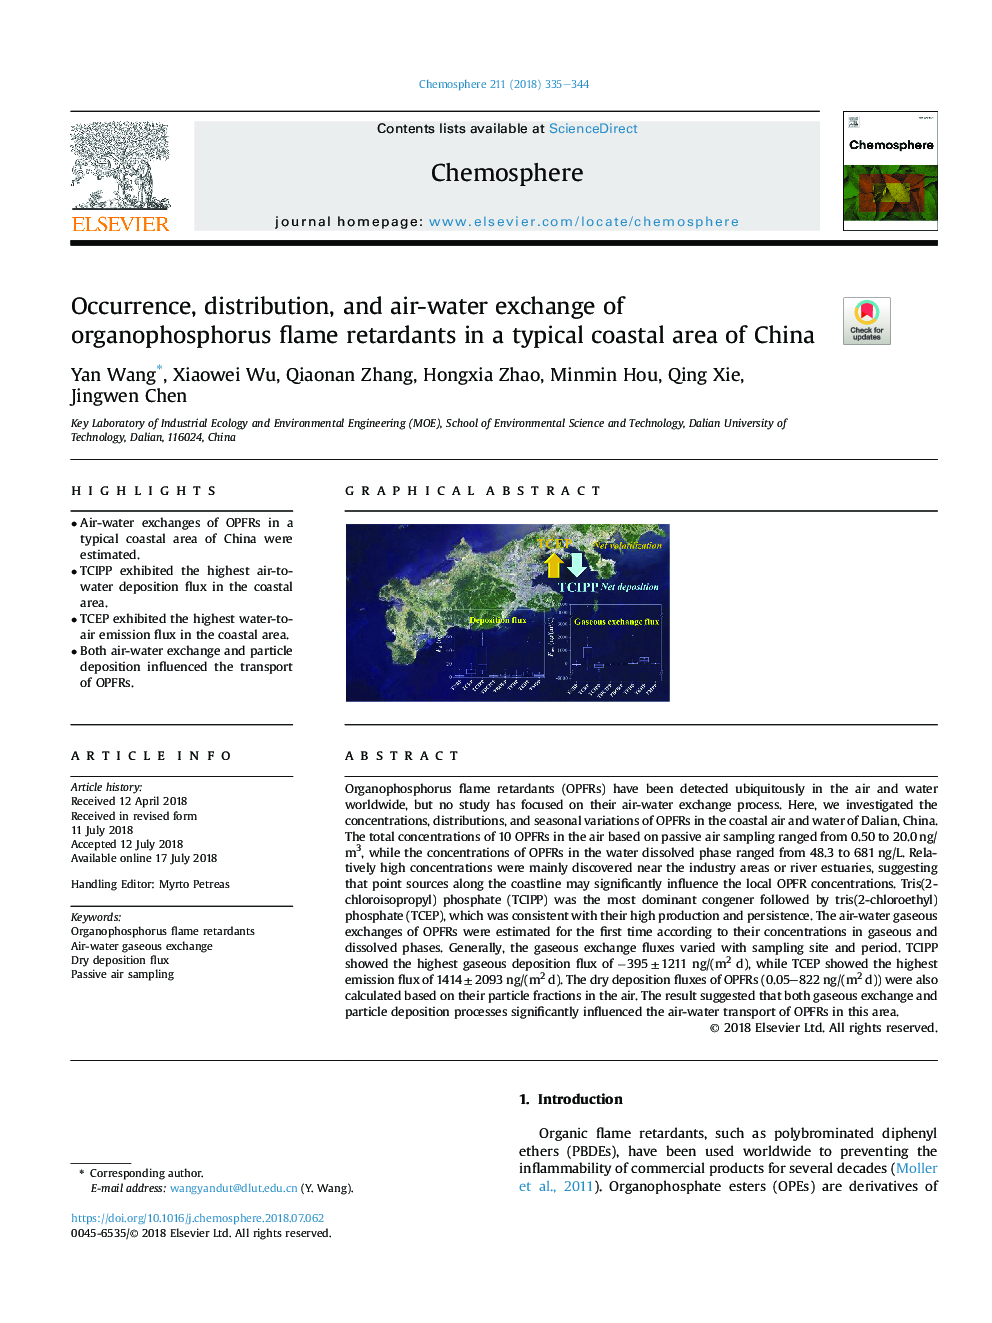 Occurrence, distribution, and air-water exchange of organophosphorus flame retardants in a typical coastal area of China